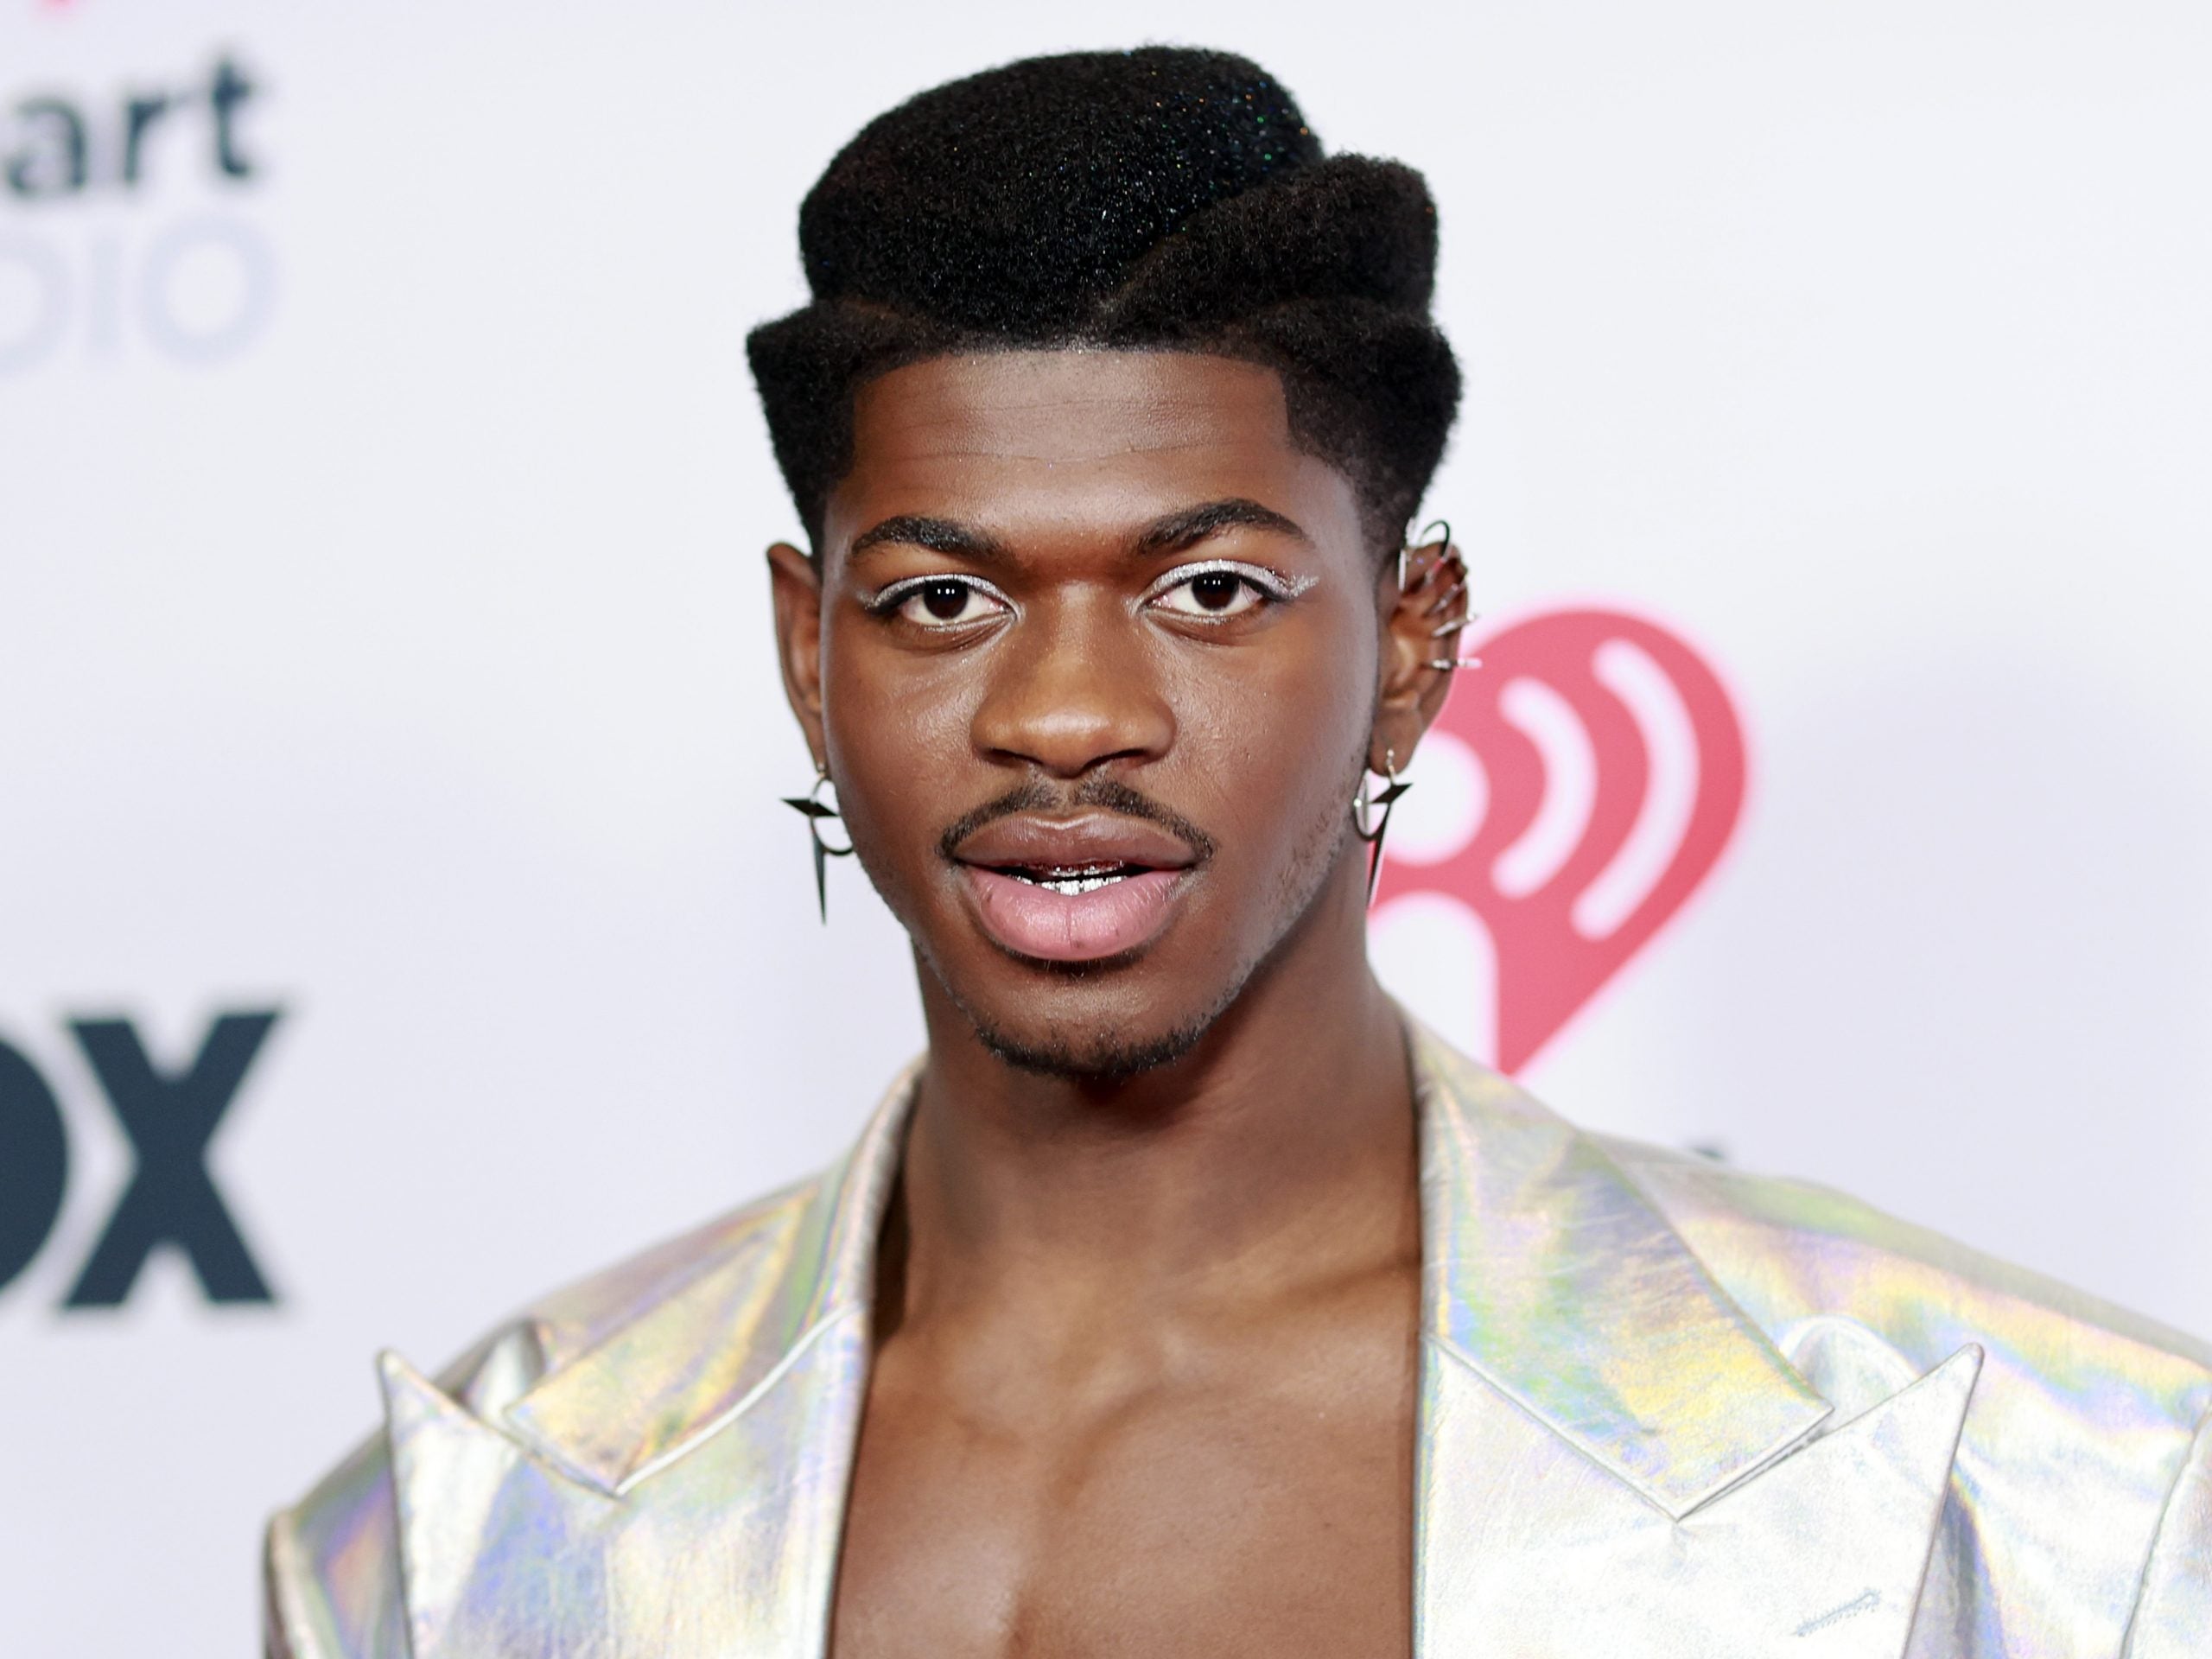 Lil Nas X Proves He's The King Of Marketing With 'Industry Baby' Promo